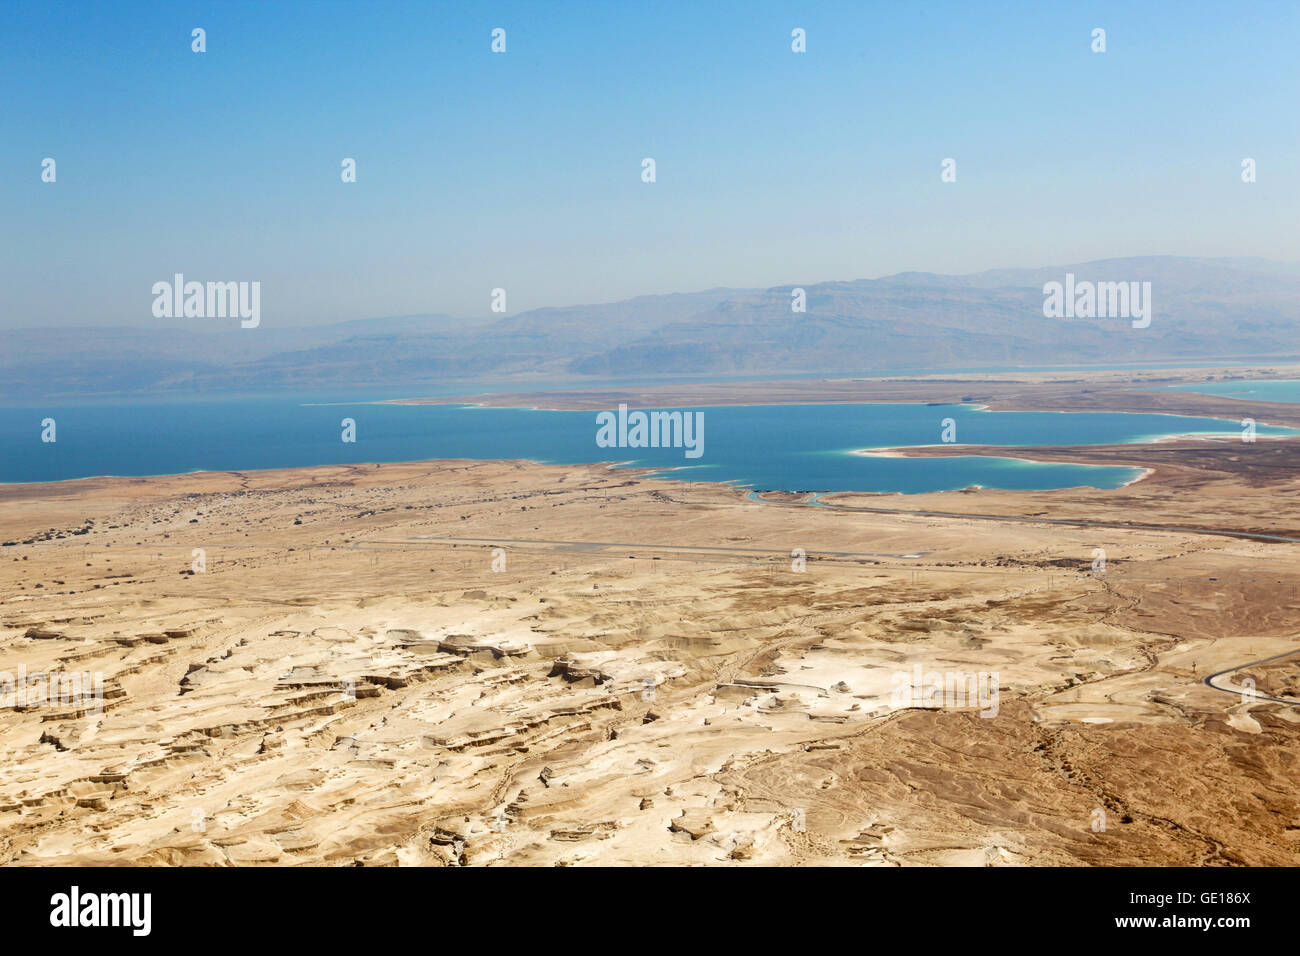 View of the Dead Sea, Israel as seen from mount Masada Stock Photo